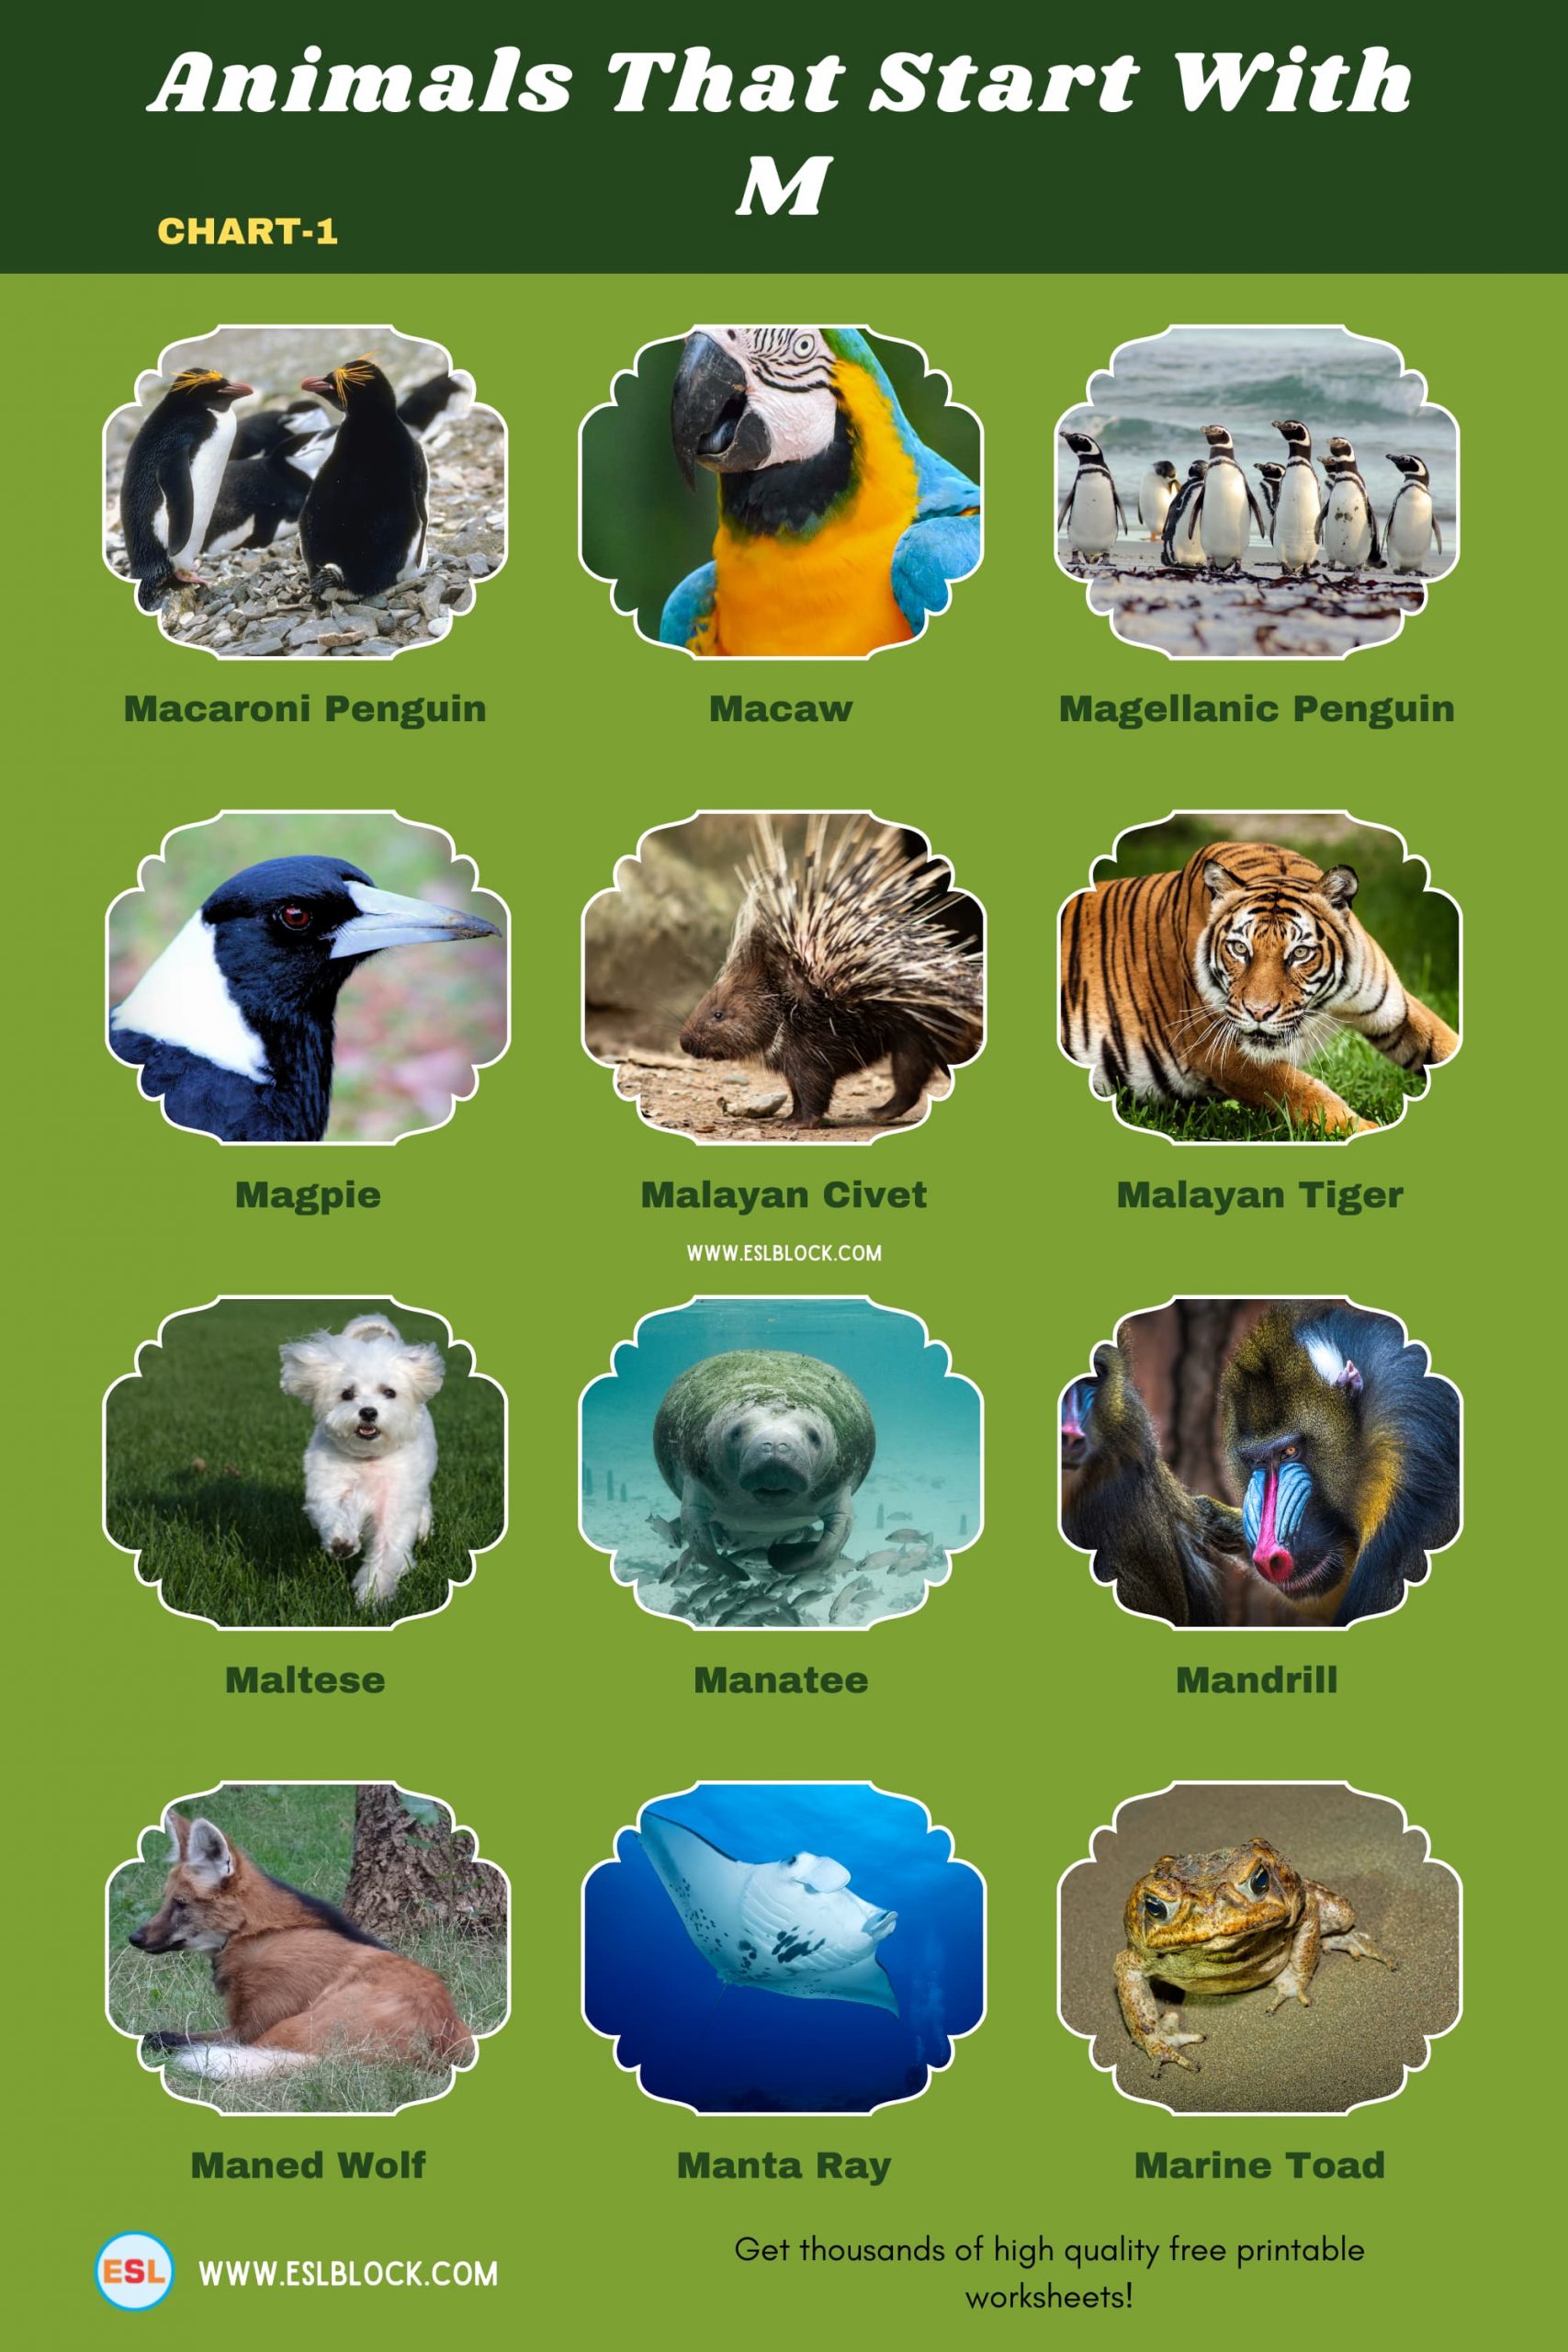 5 Letter Animals Starting With M, Animals List, Animals Names, Animals That Begins With M, Animals That Start With M, English, English Nouns, English Vocabulary, English Words, List of Animals That Start With M, M Animals, M Animals in English, M Animals Names, Nouns, Vocabulary